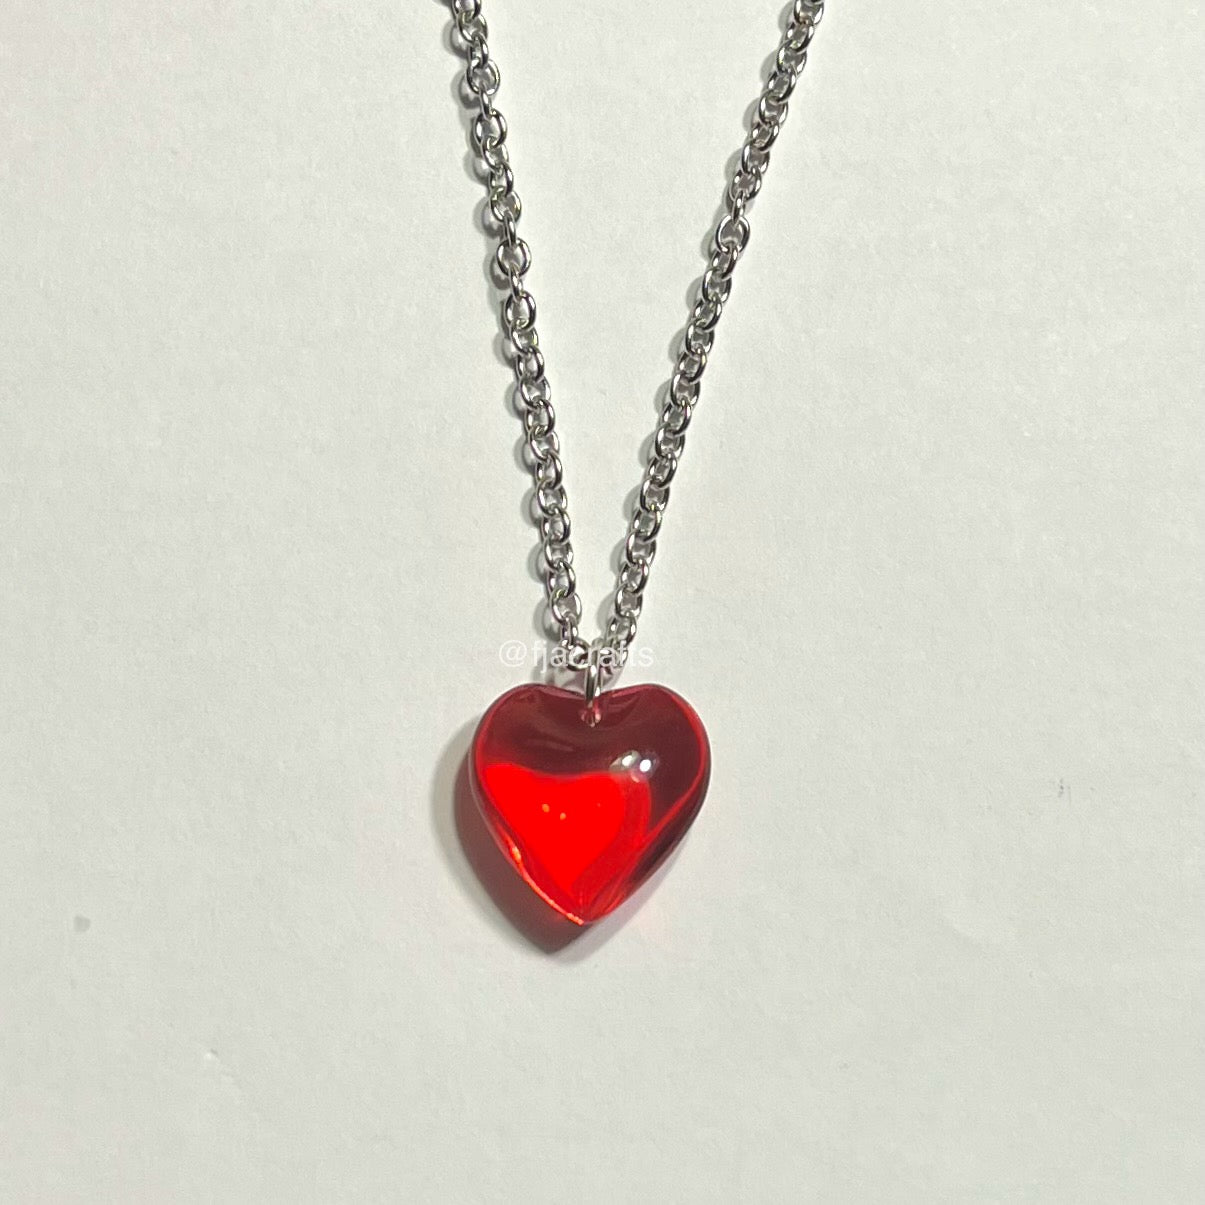 Glass Heart Dainty Chain Necklace| silver, heart, clear, pink | Sweetheart Jewels FJA Crafts